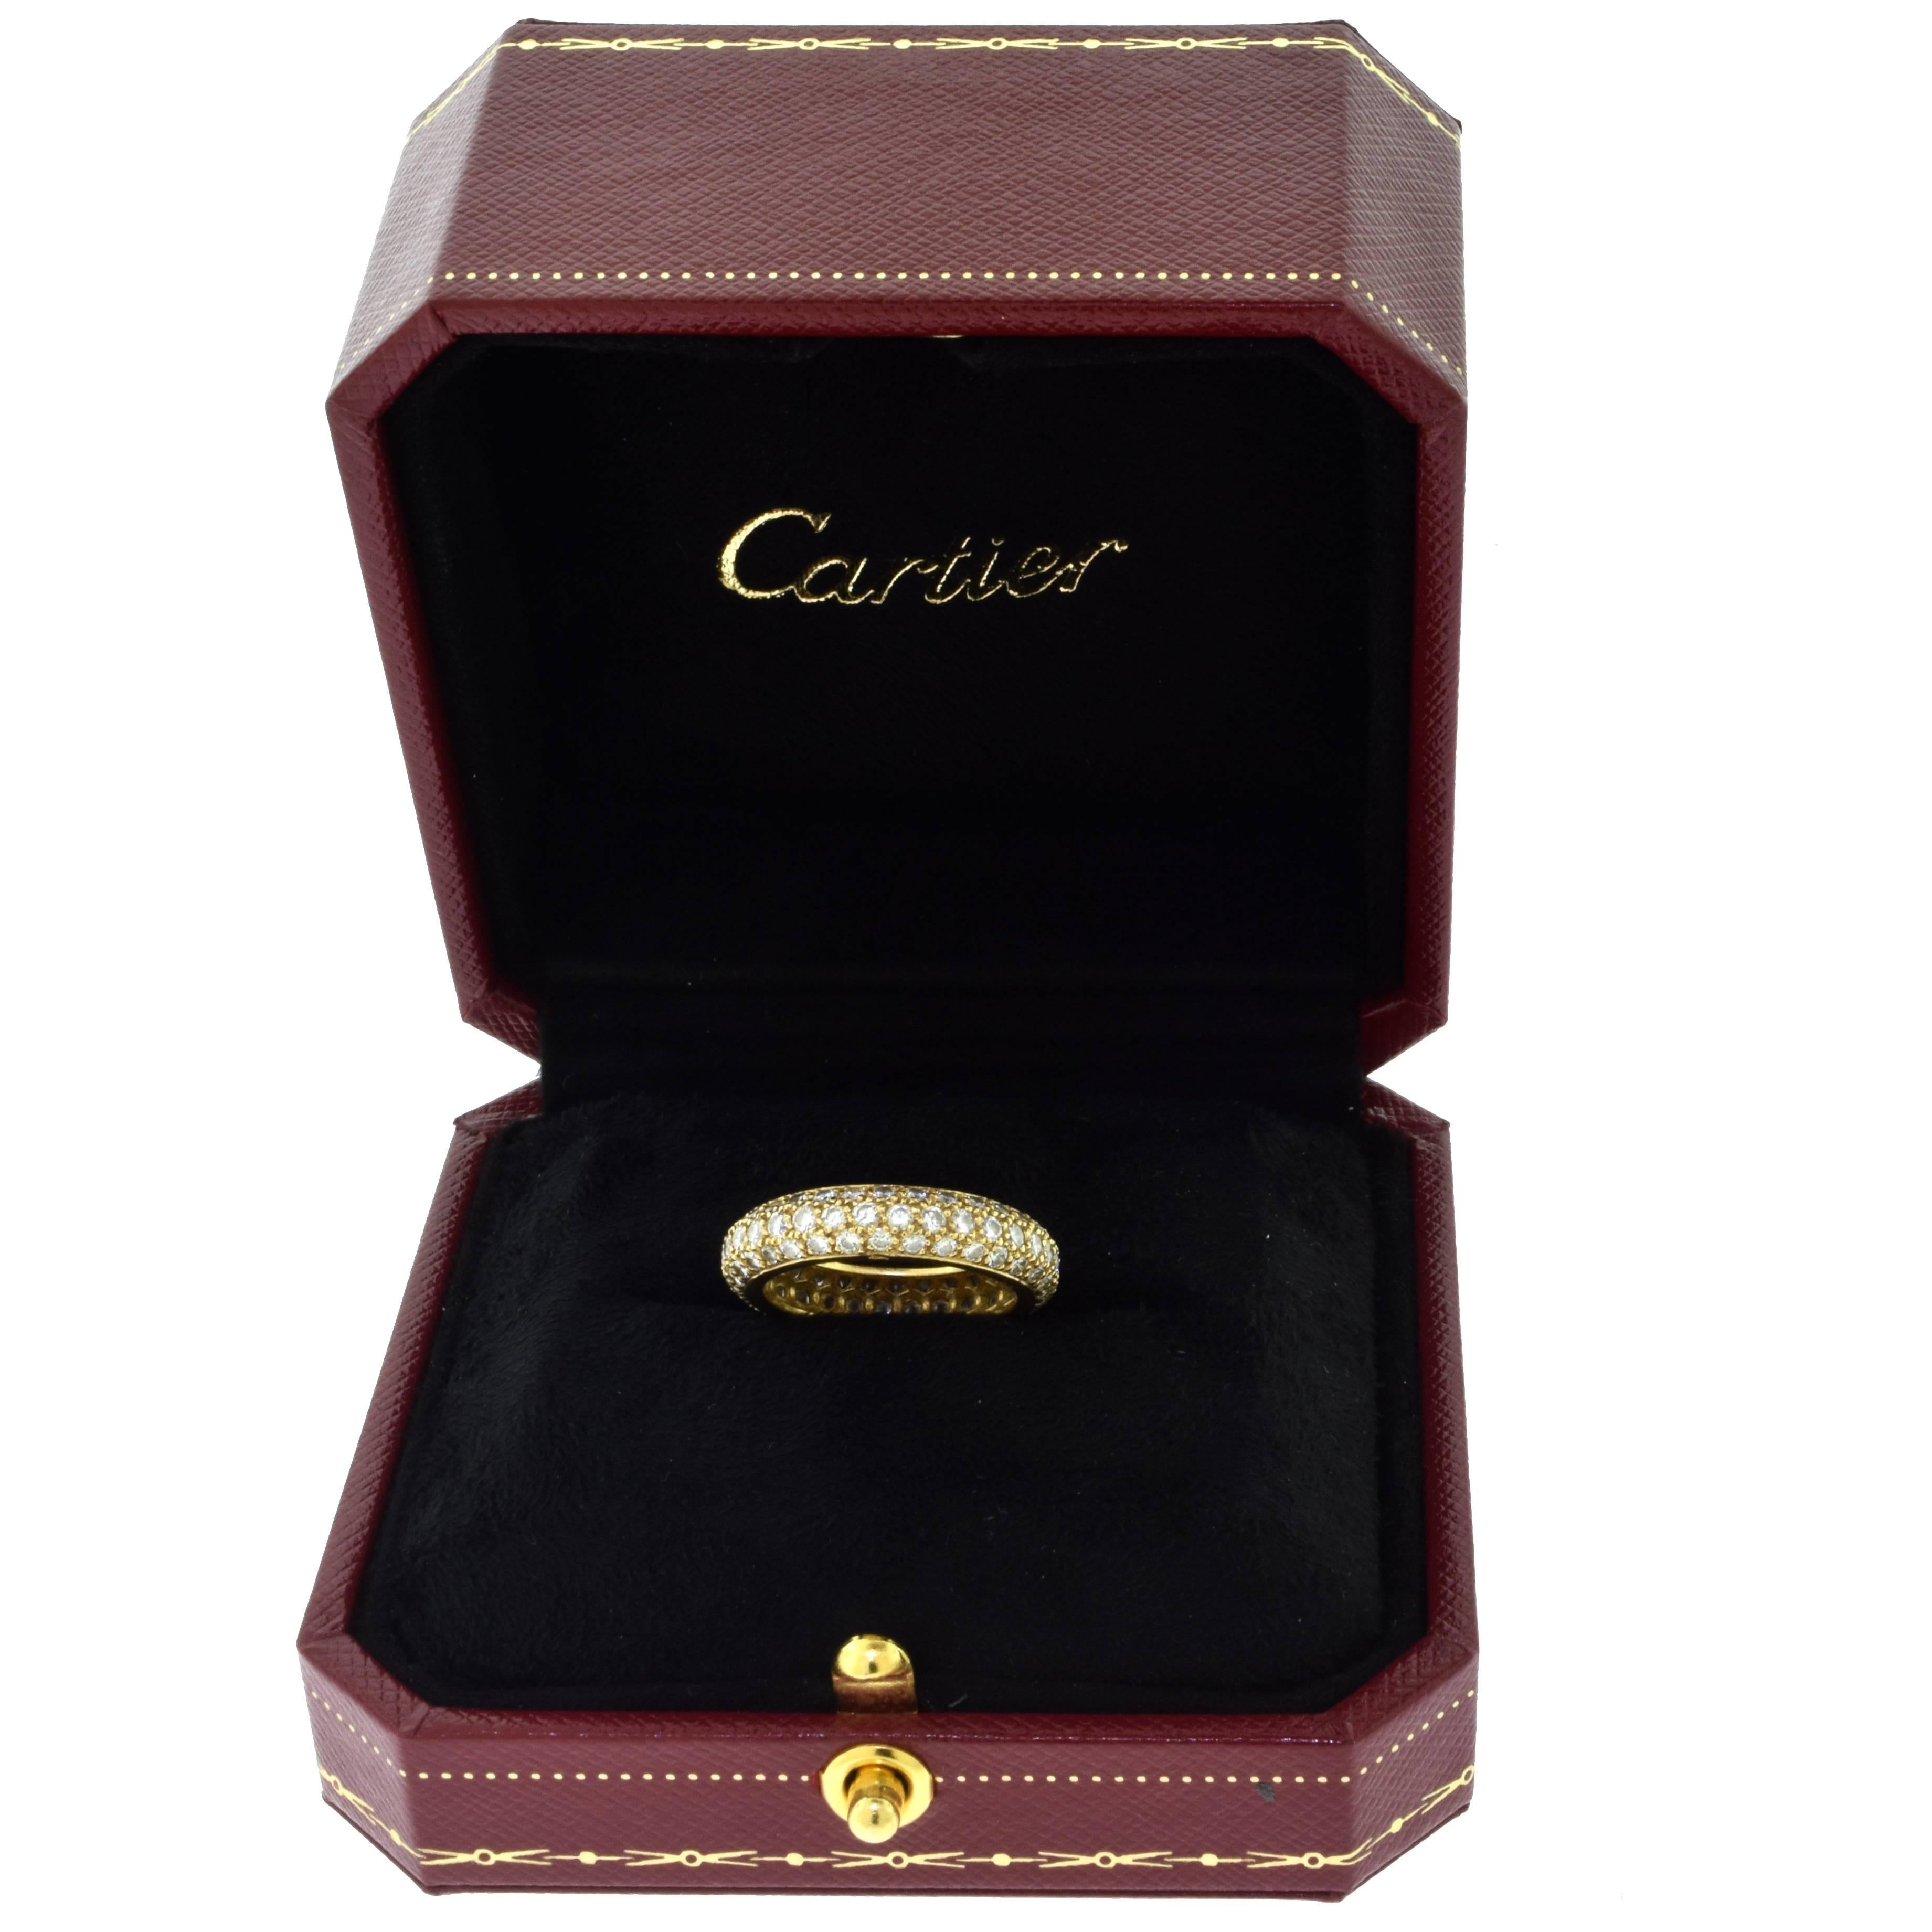 Vintage Cartier Pave Diamond Eternity Ring in 18 Karat Yellow Gold In Excellent Condition For Sale In Miami, FL